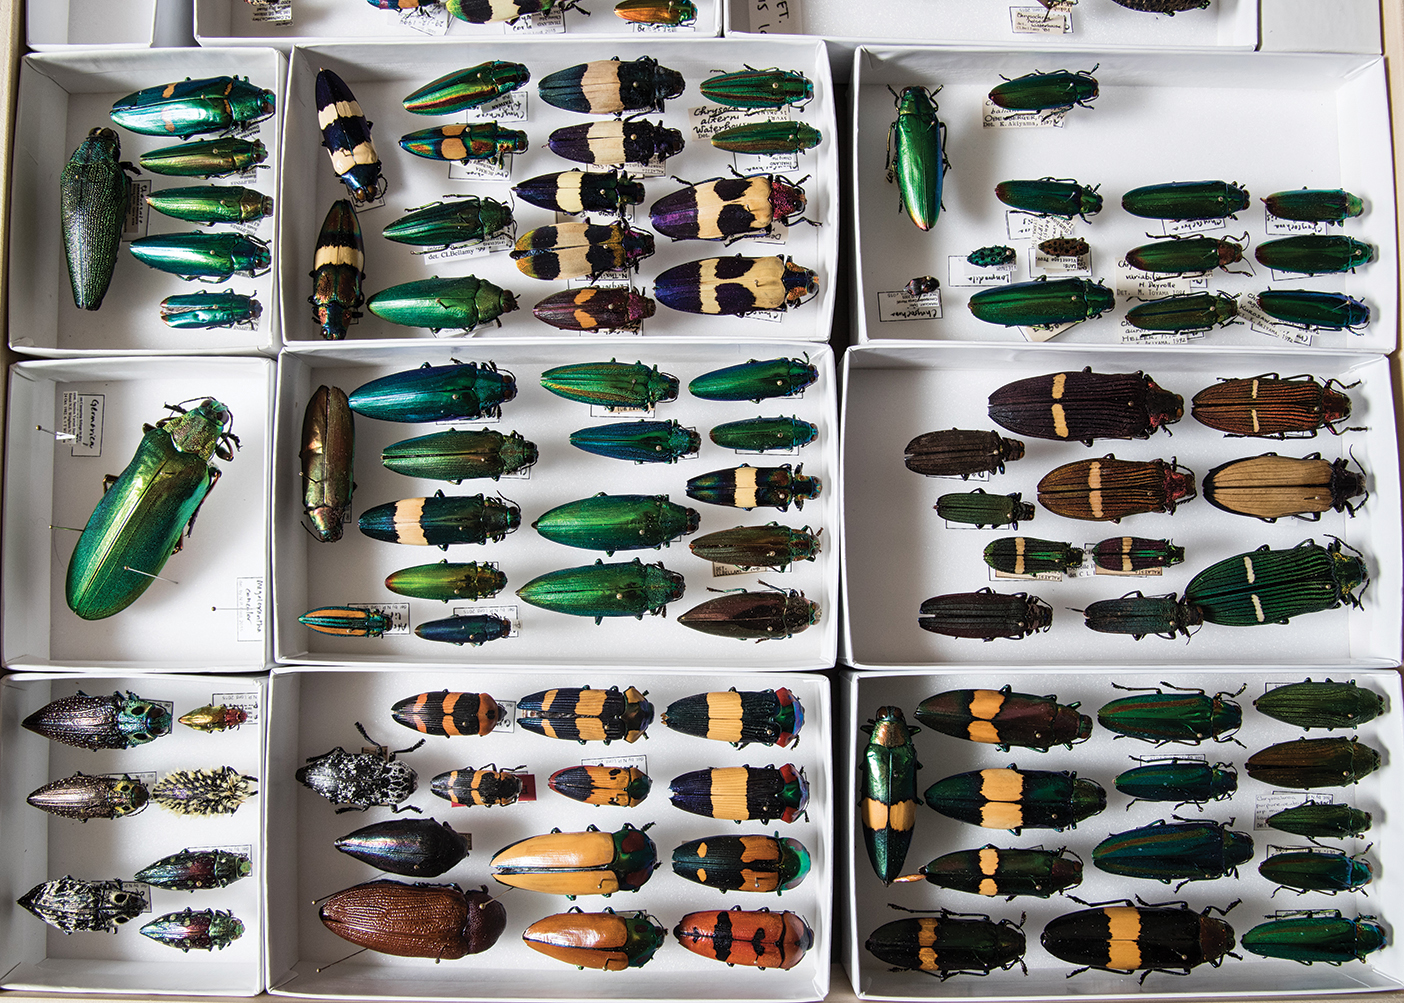 Emerald ash borers and other wood-borer beetles